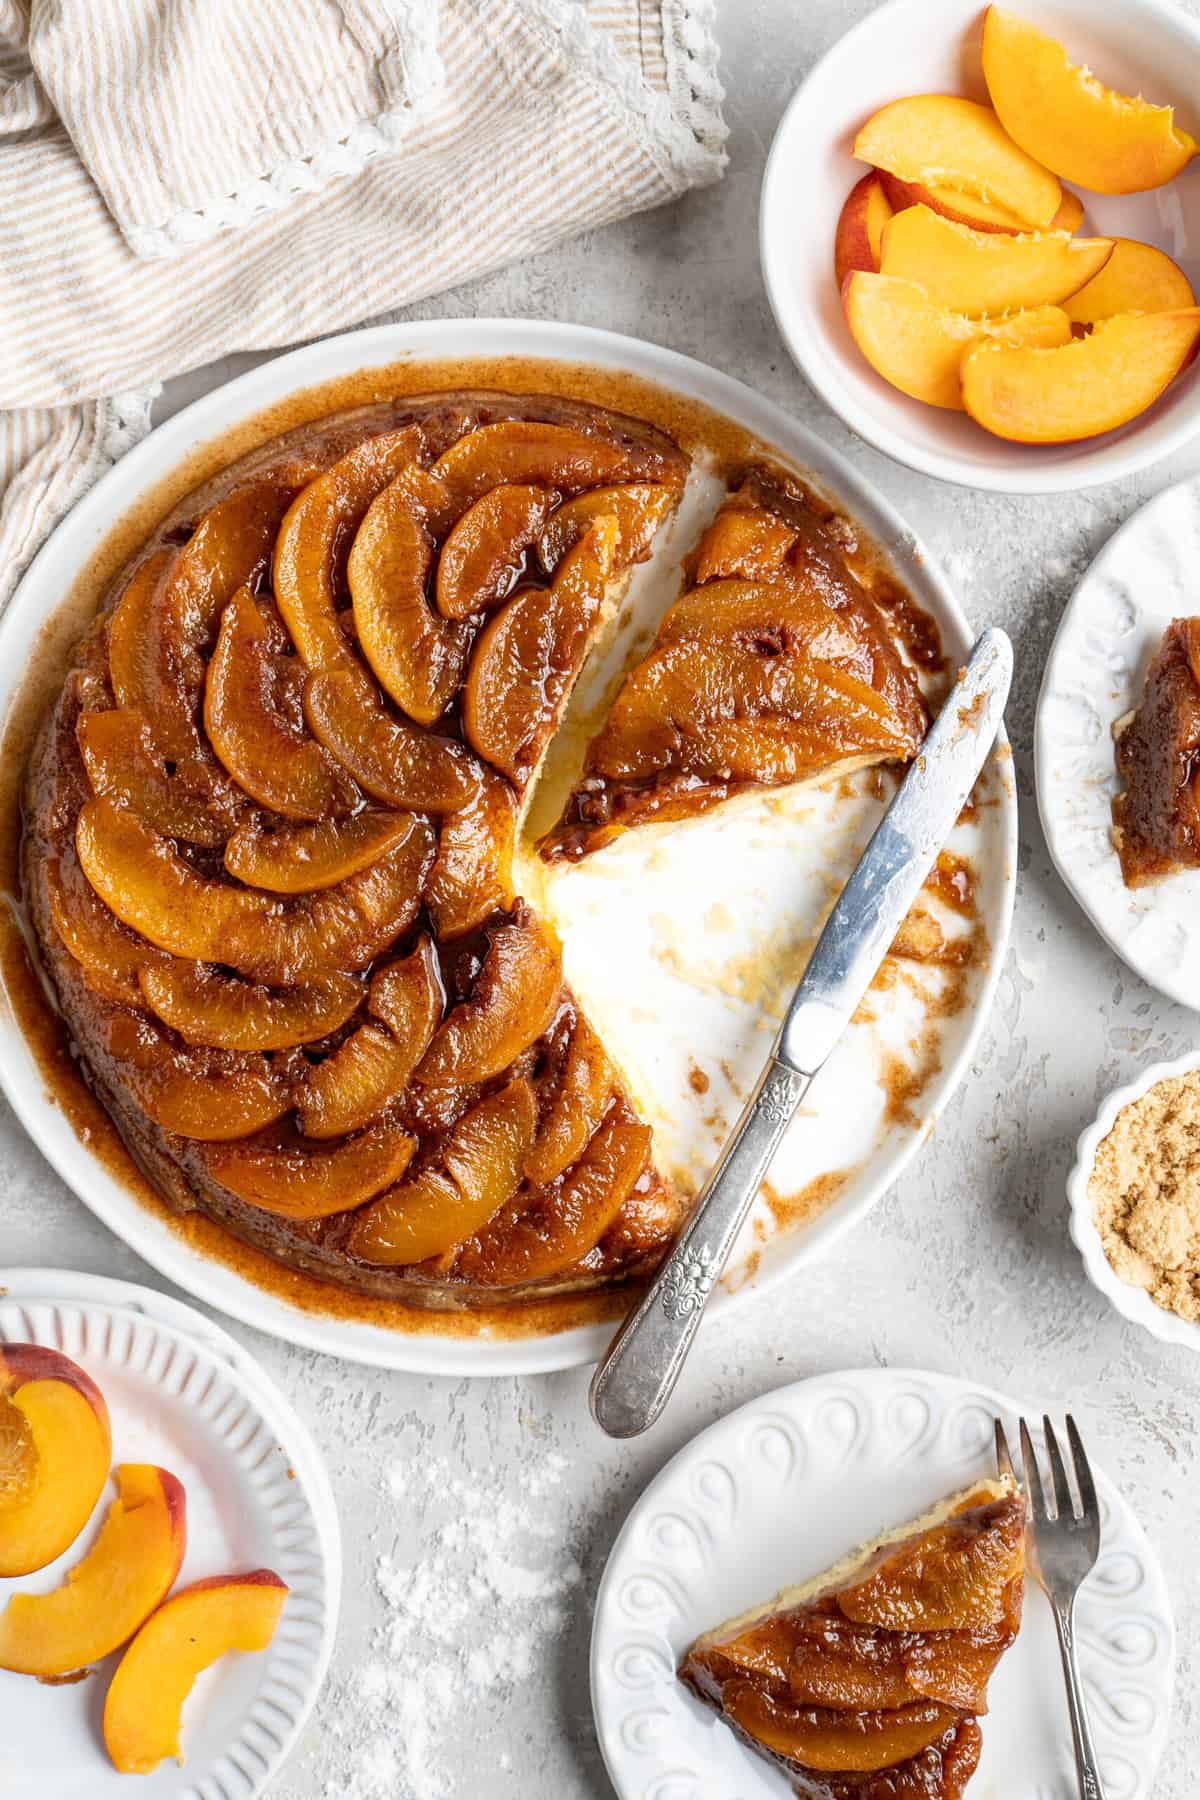 A peach upside down cake with slices placed on plates nearby